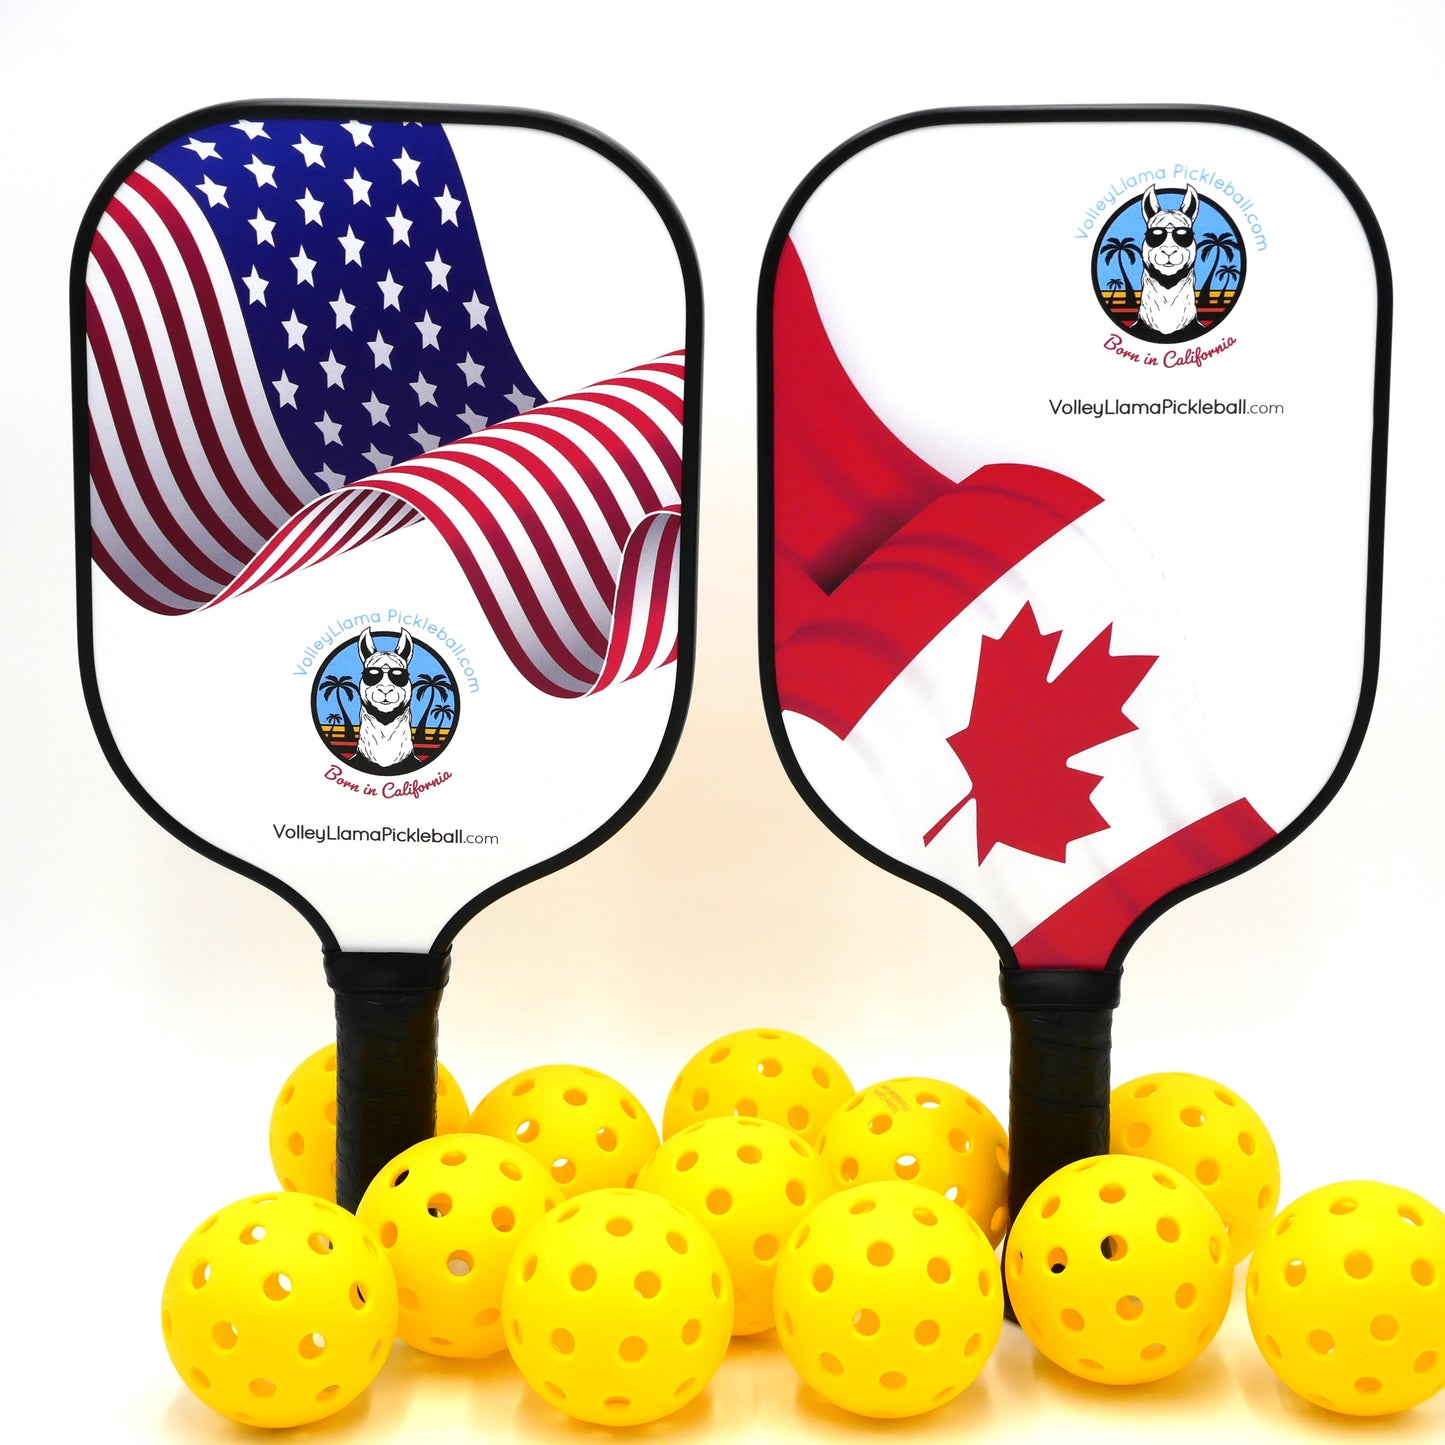 USA And Canada Pickleball Paddles Set of 2